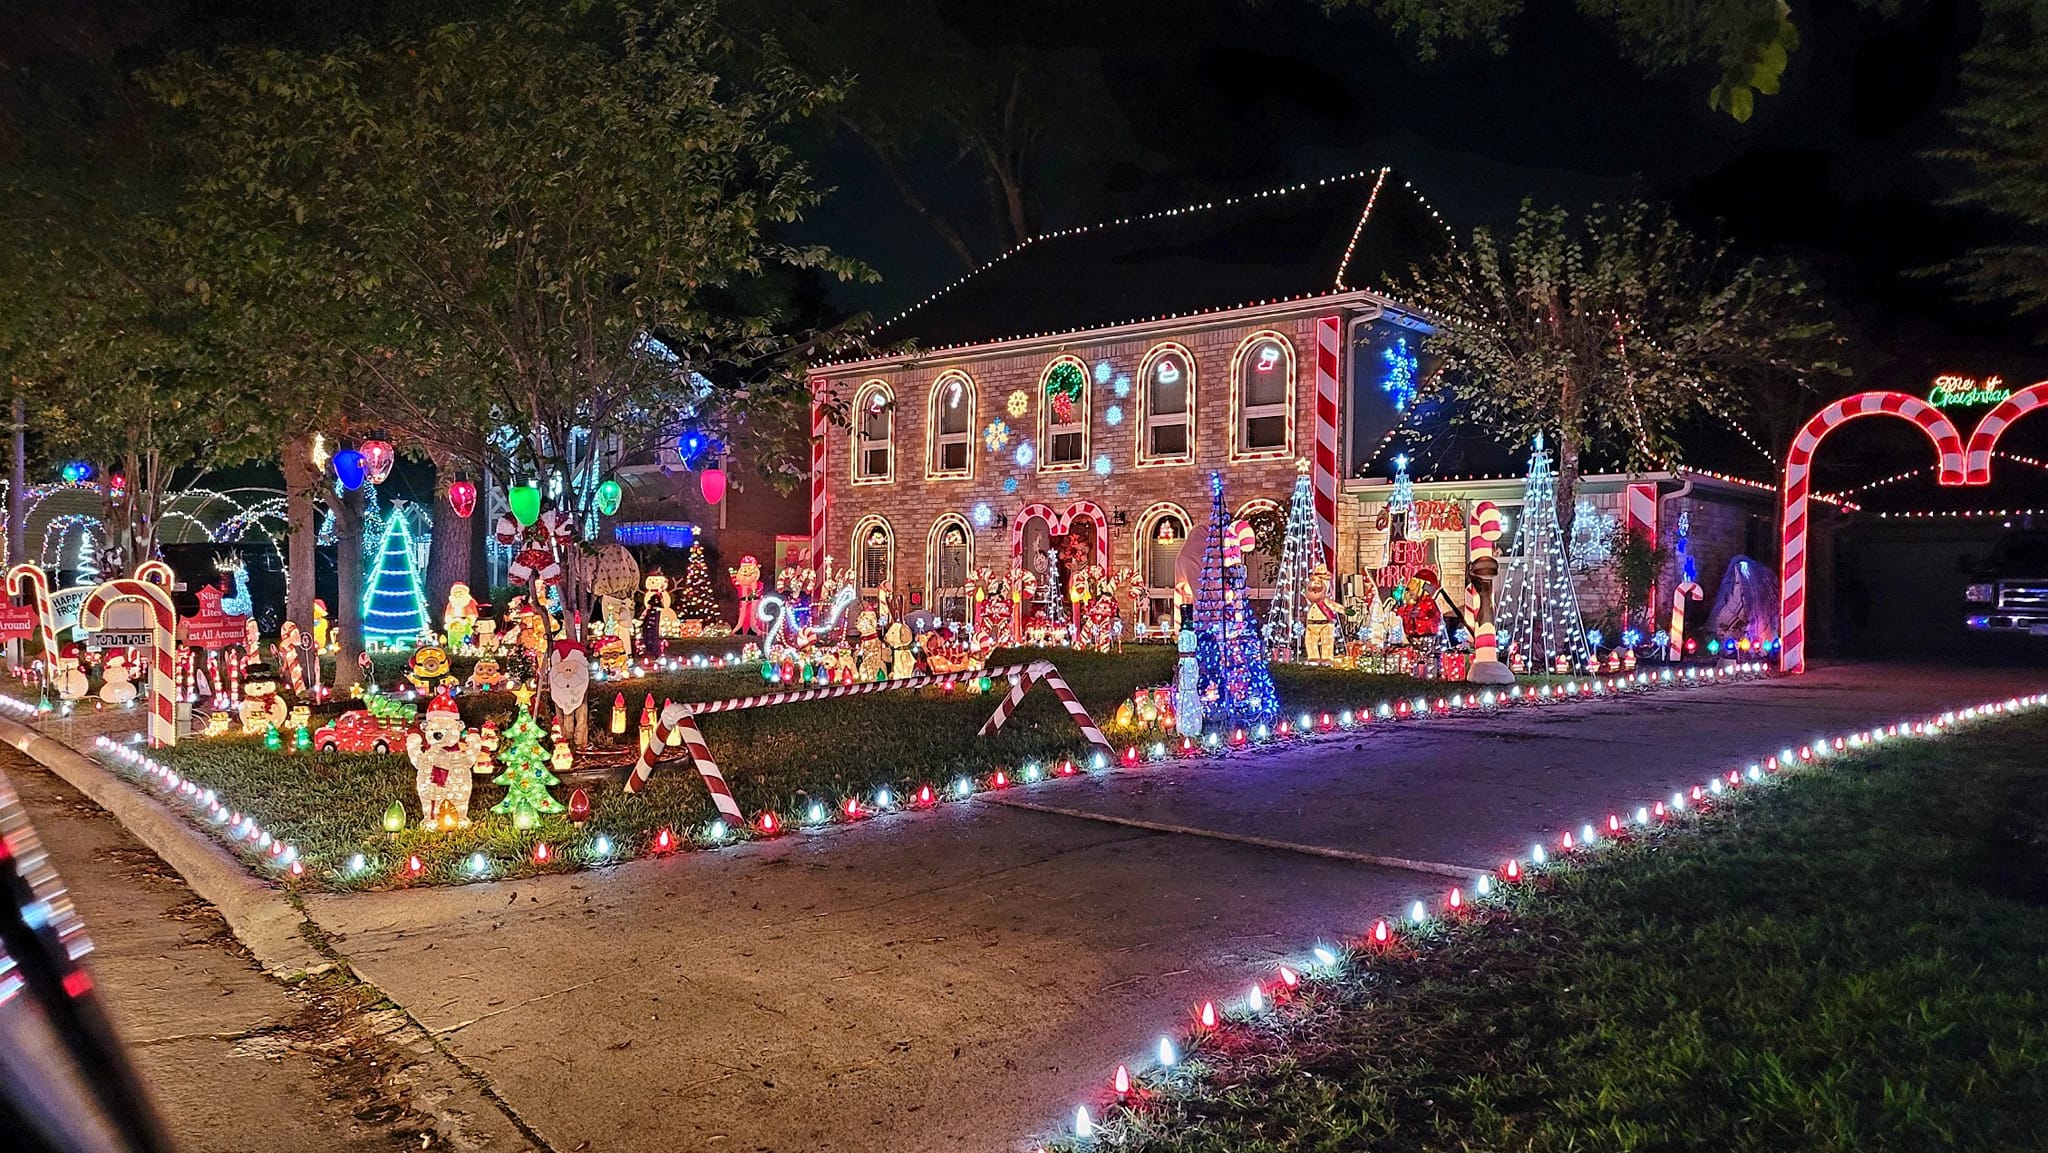 Experience the Magic of Holiday Lights at 45th Annual Nite of Lites in Prestonwood Forest